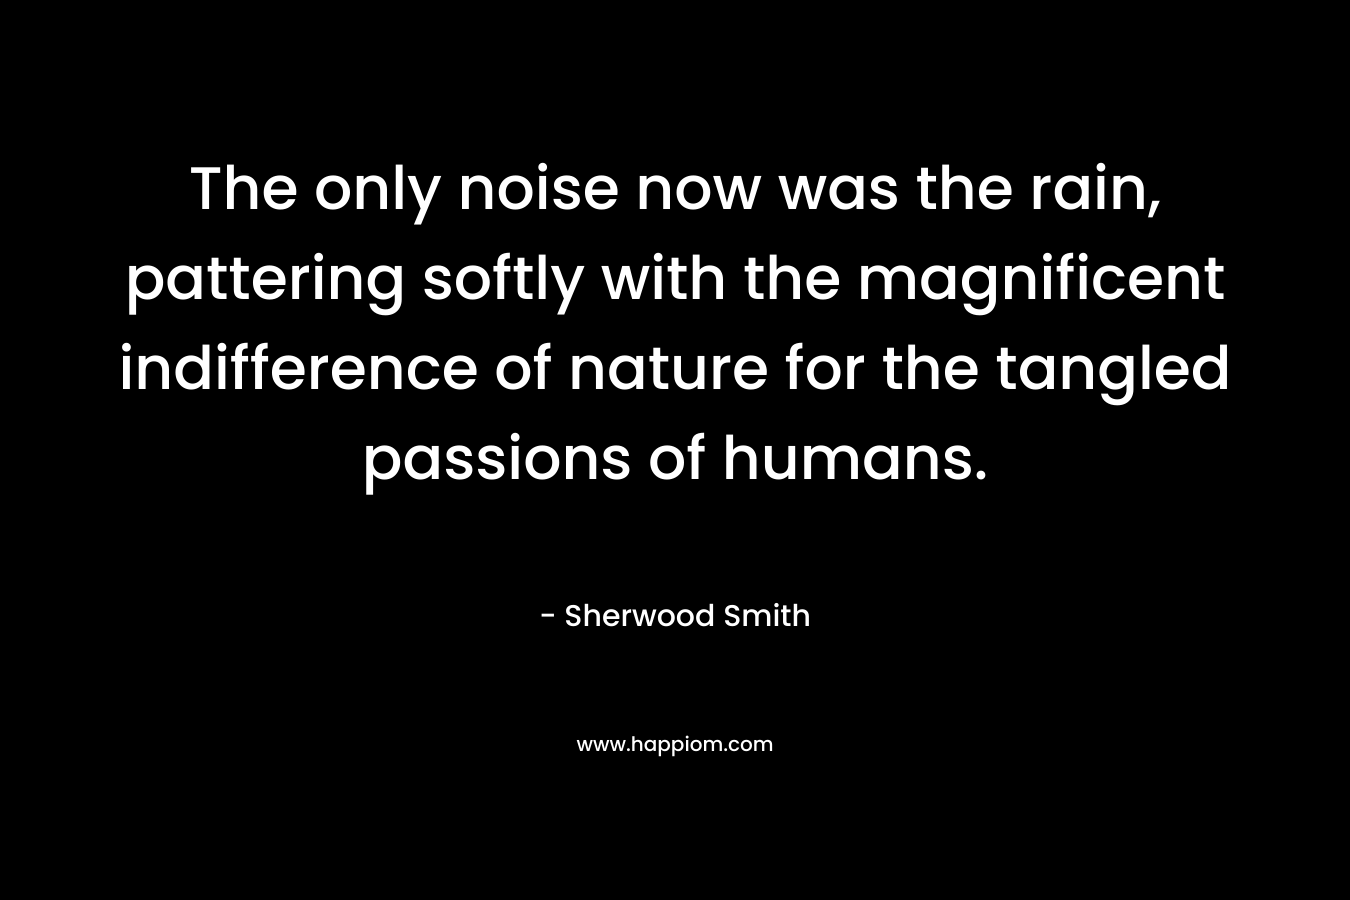 The only noise now was the rain, pattering softly with the magnificent indifference of nature for the tangled passions of humans.